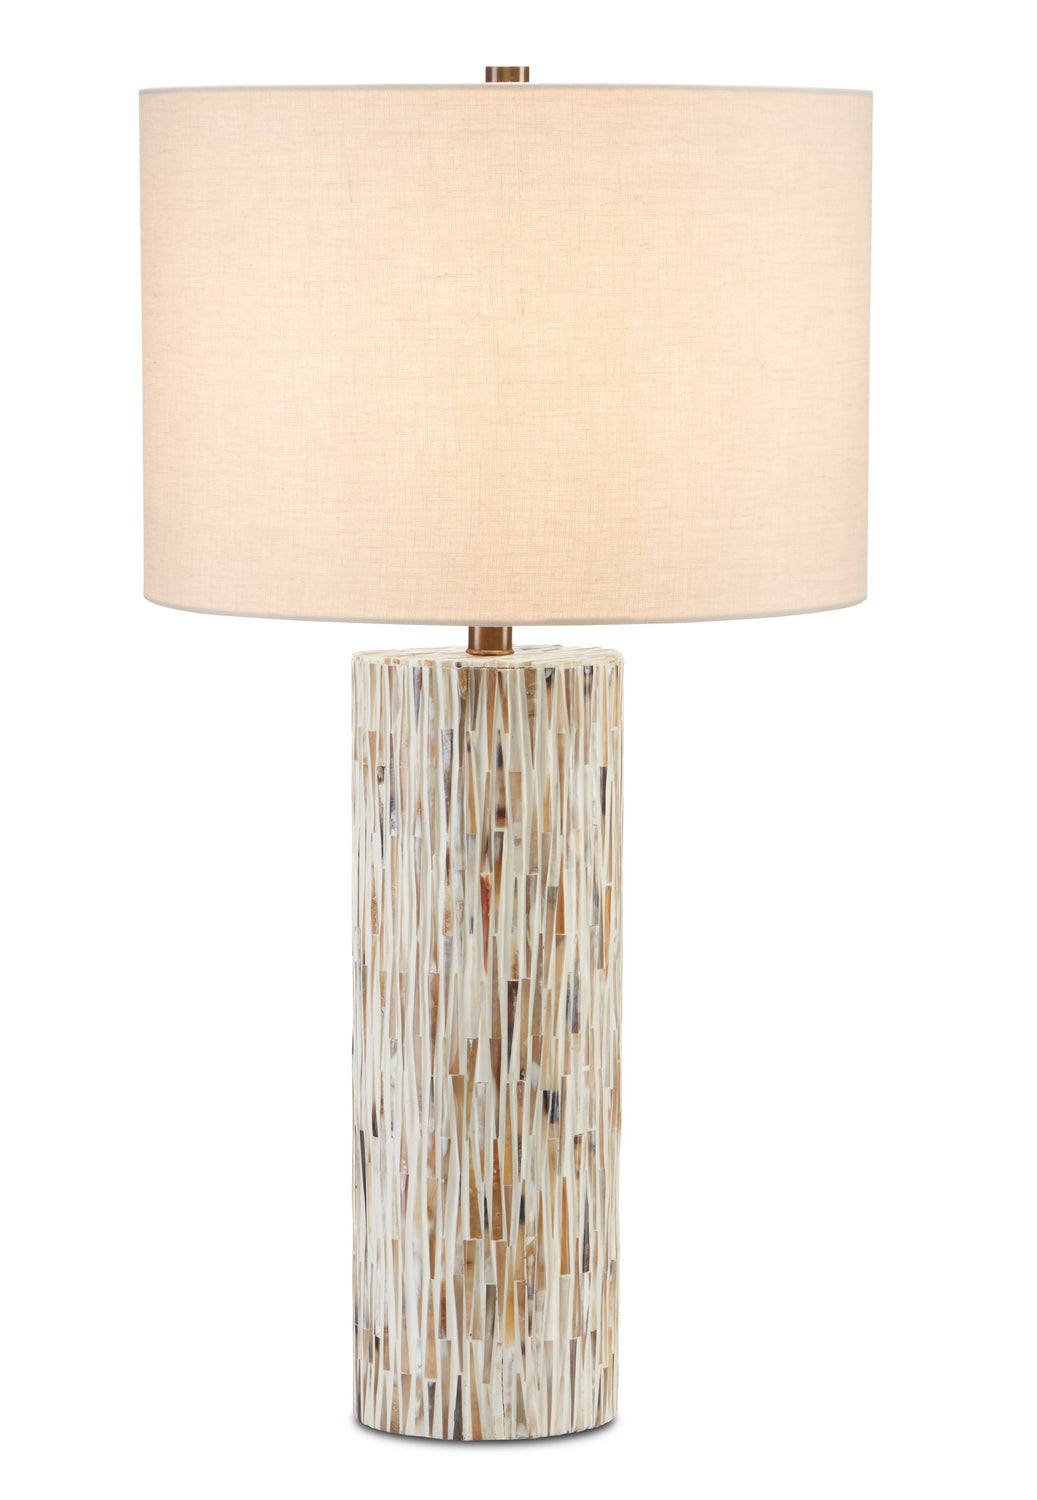 One Light Table Lamp from the Aquila collection in Natural Bone/Antique Brass finish